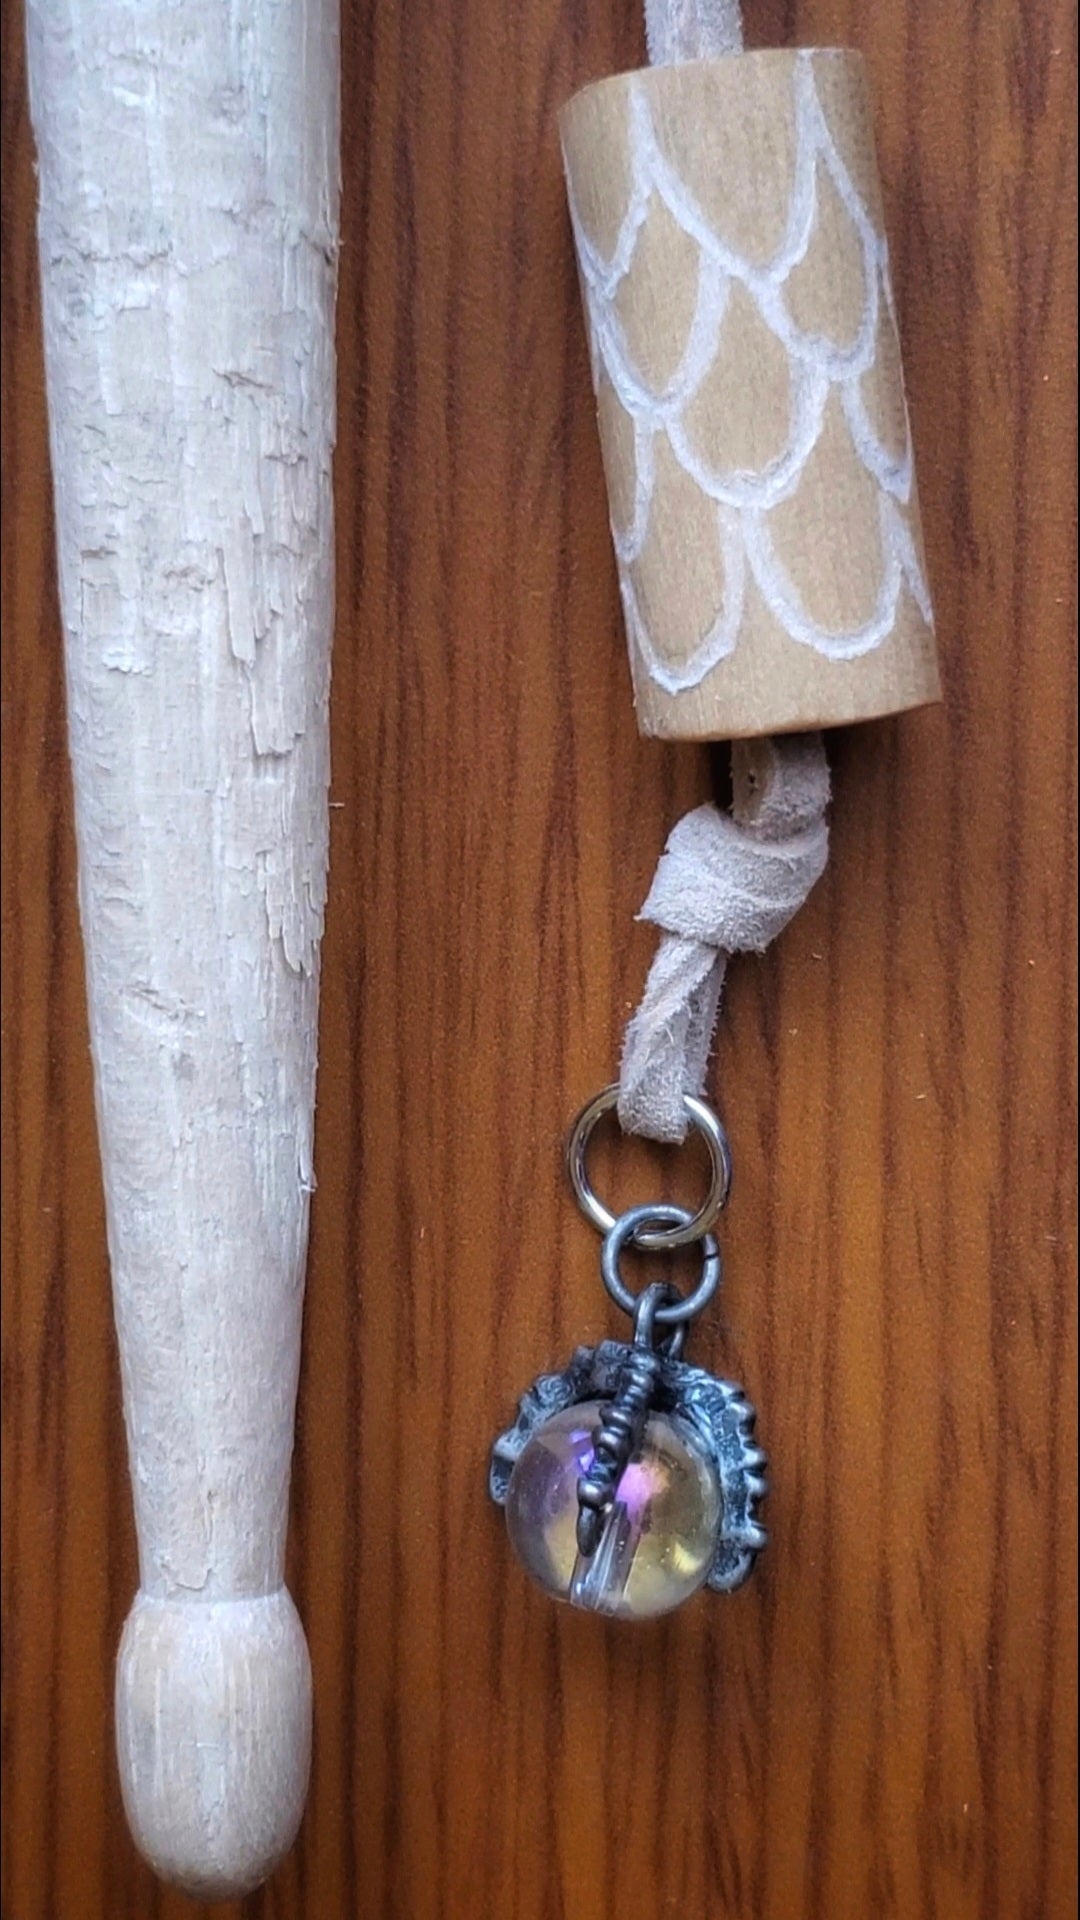 necklace made from a piece of upcycled drumstick on which dragon scales are etched under the drumstick a silver coloured dragon claw pendant holds a clear bead - a beige swede cord holds the pendant - next to the pendant there is a damaged drumstick